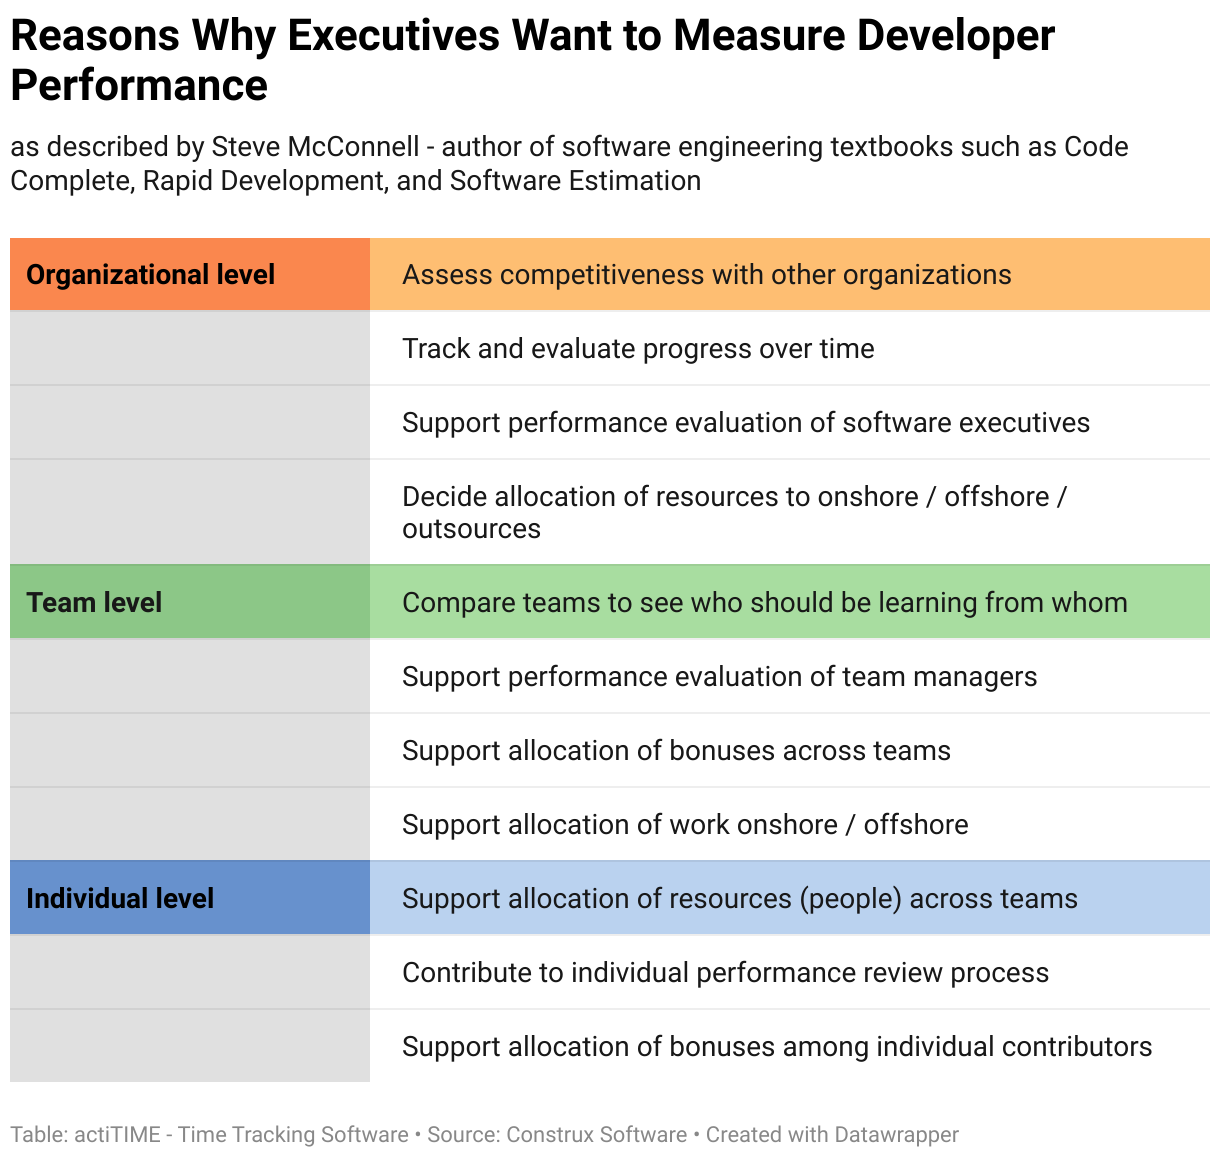 reasons-why-executives-want-to-measure-developer-performance-nbsp-.png